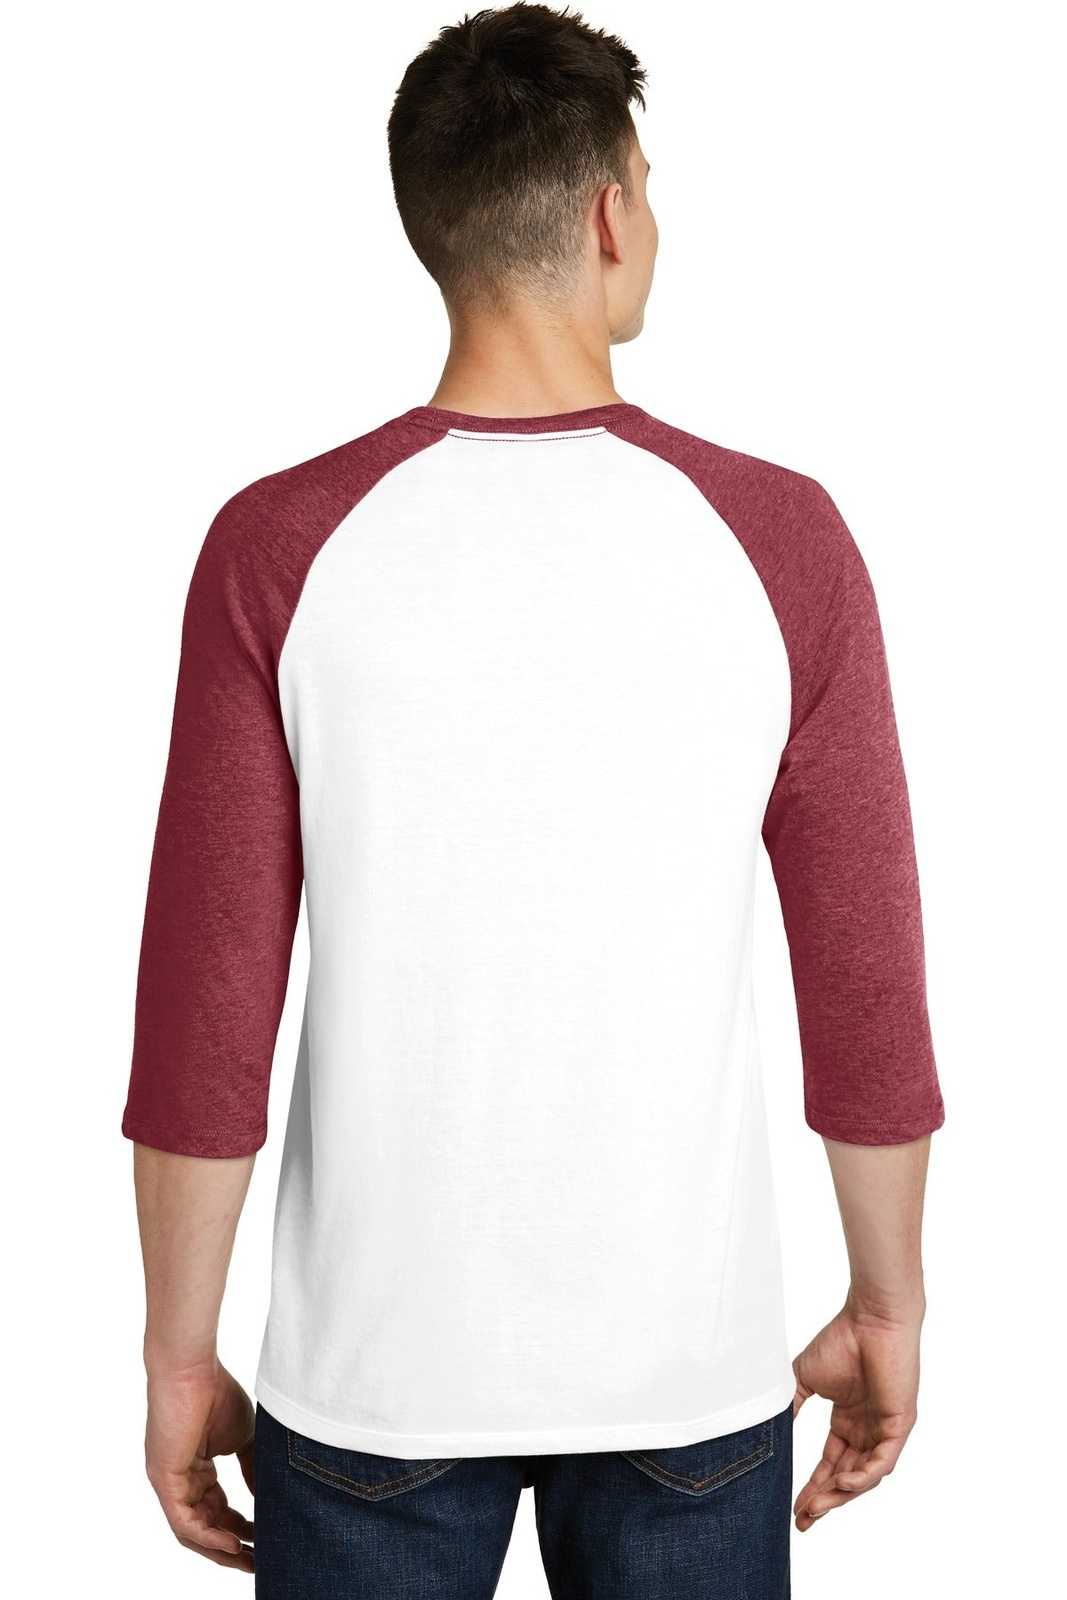 District DT6210 Very Important Tee 3/4-Sleeve Raglan - Heathered Red White - HIT a Double - 2